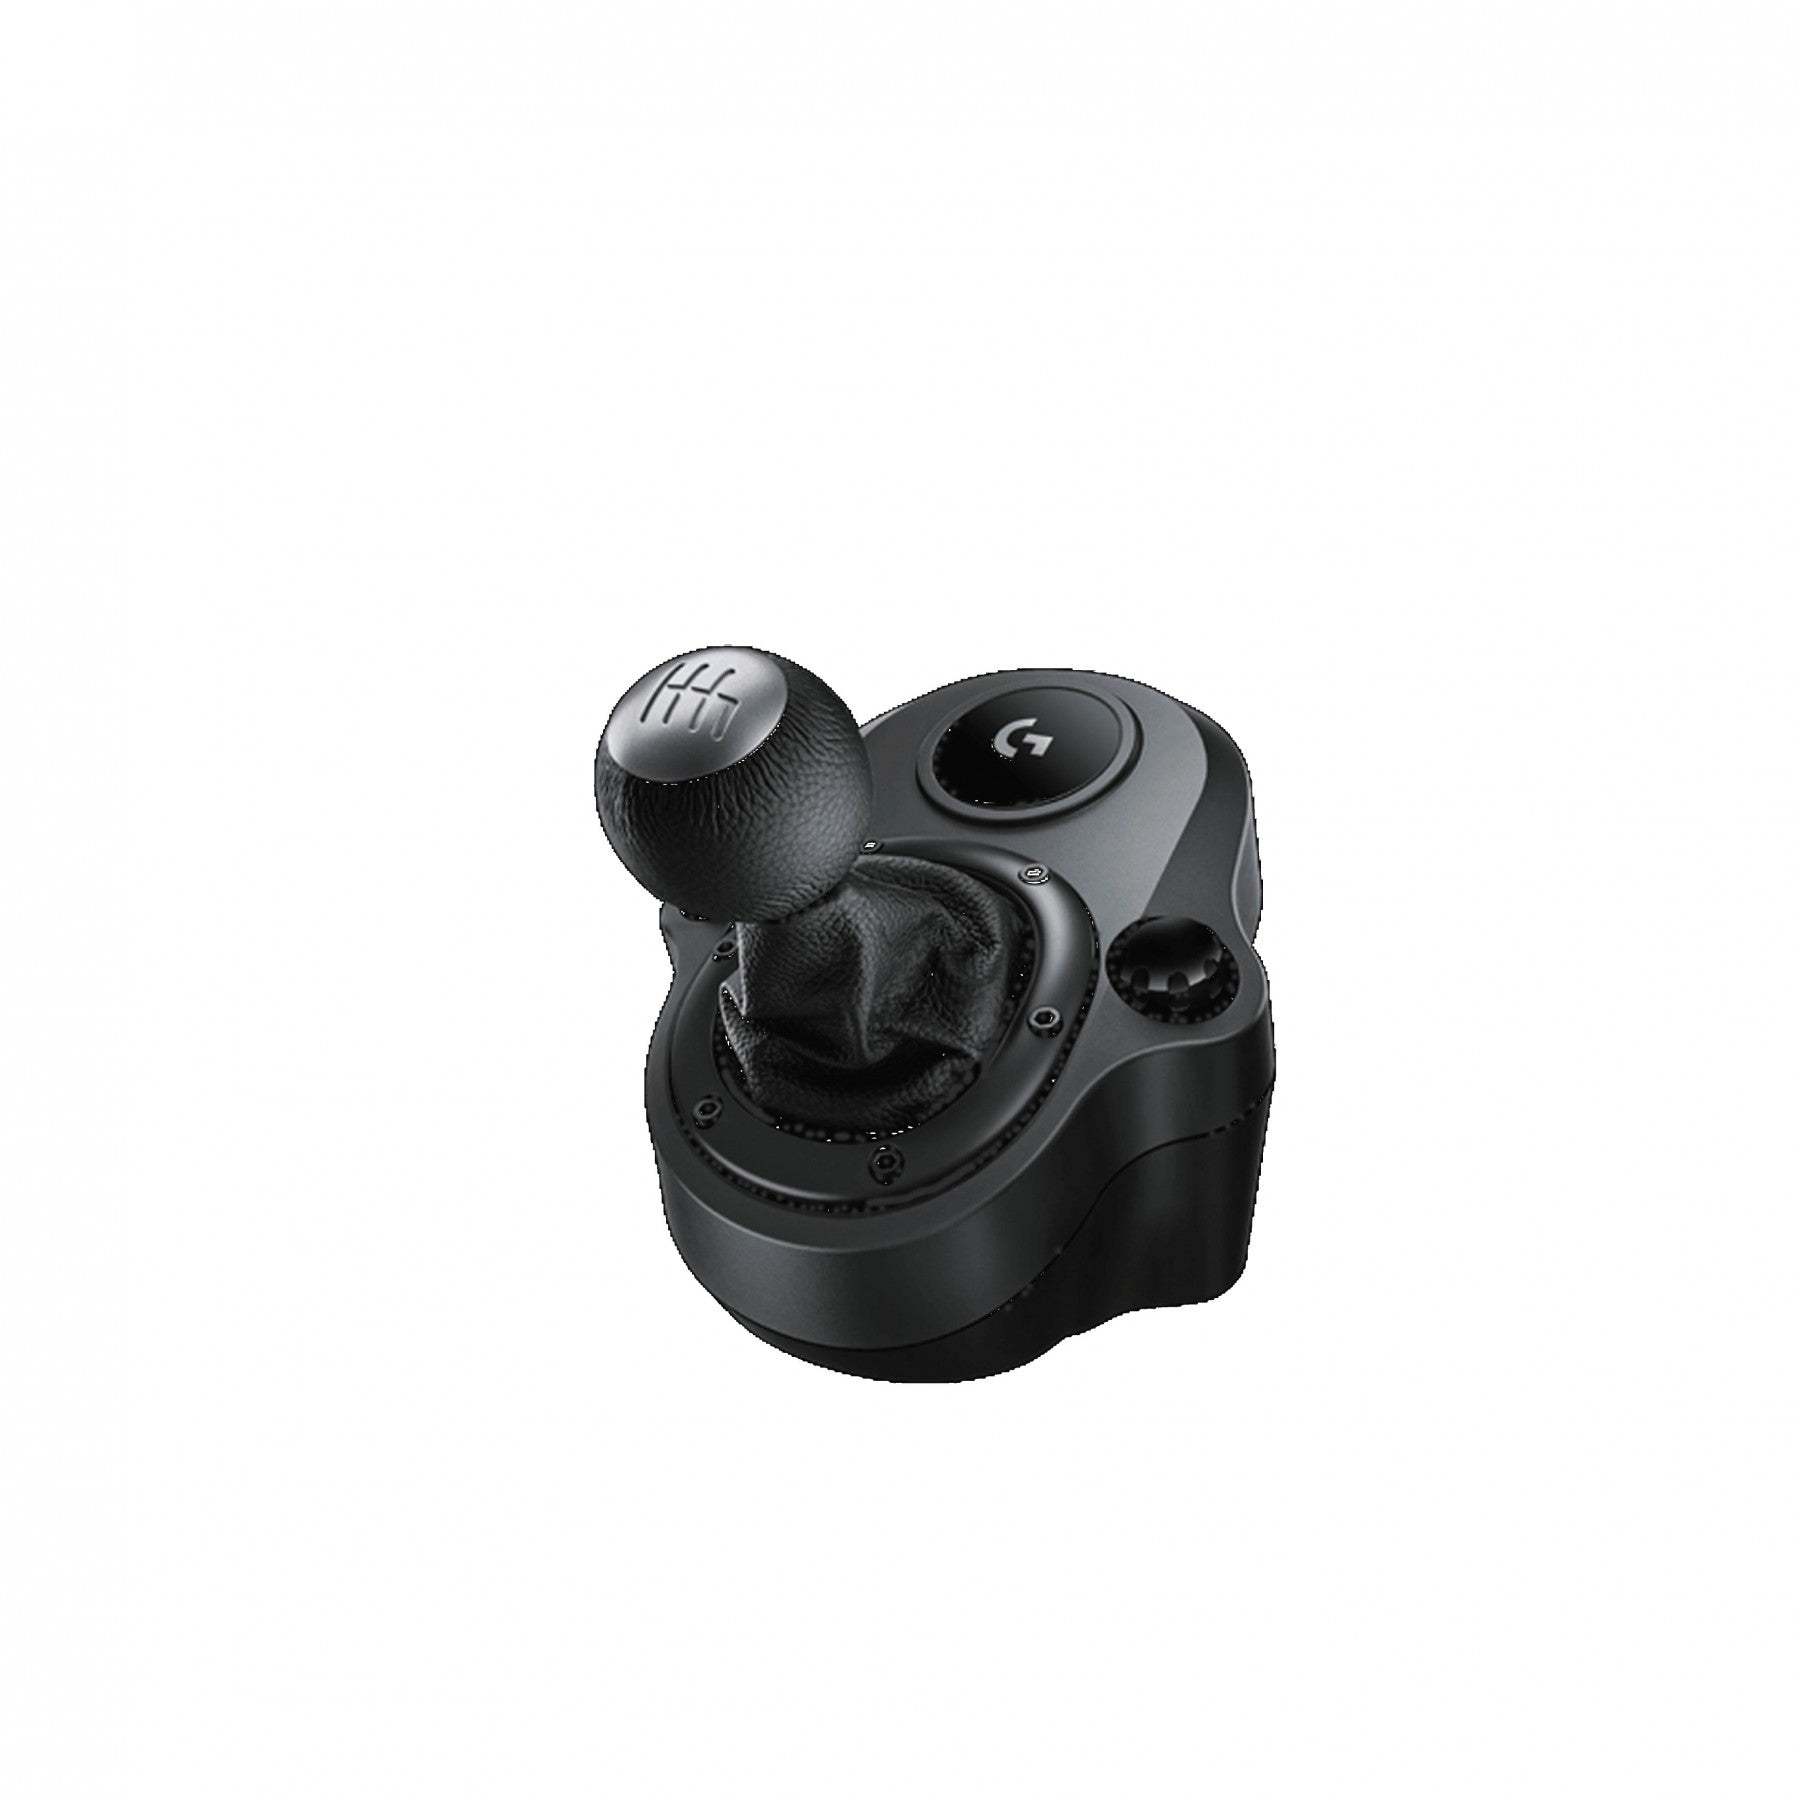 Logitech Driving Force Shifter For G29 and G920 Driving Force Racing Wheels